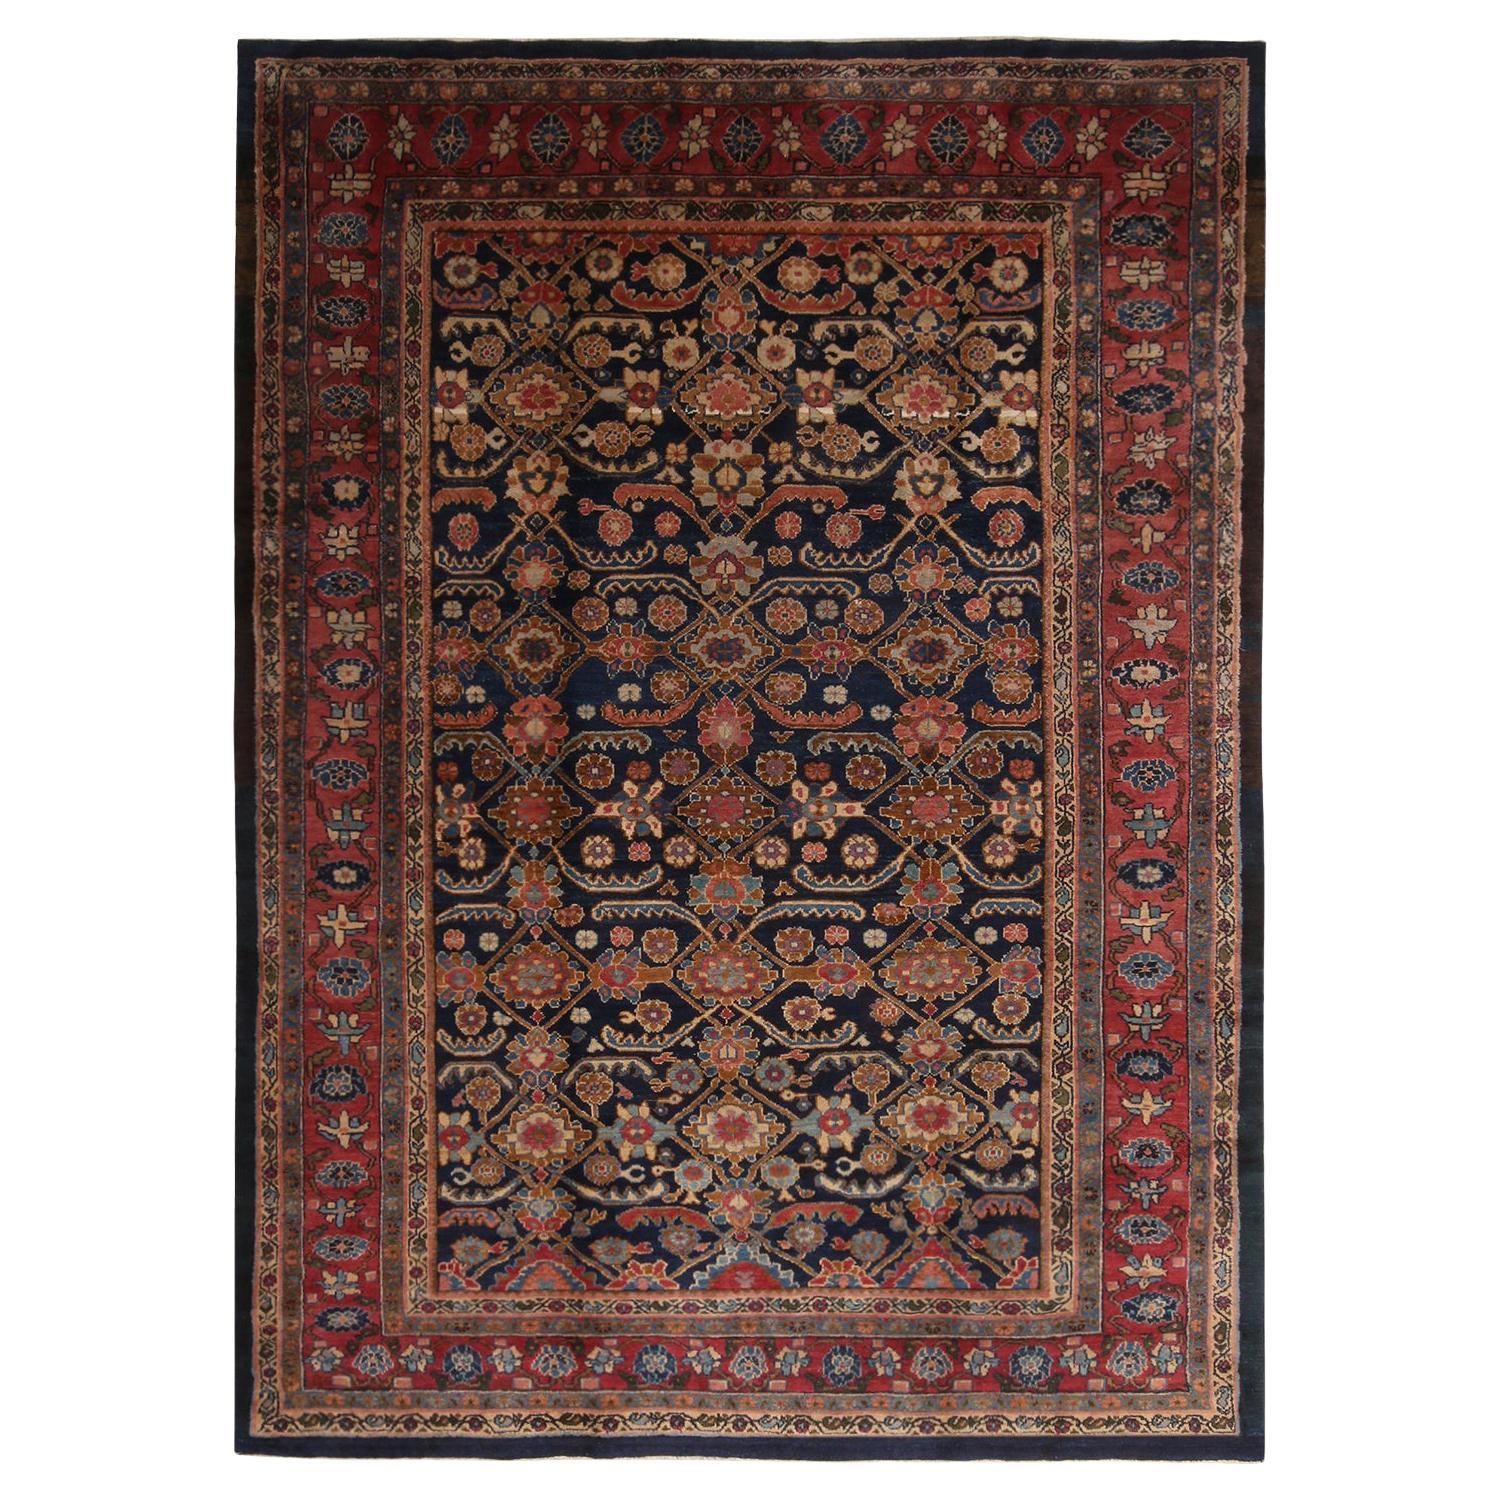 Antique Geometric-Floral Red and Navy Blue Wool Persian Rug by Rug & Kilim